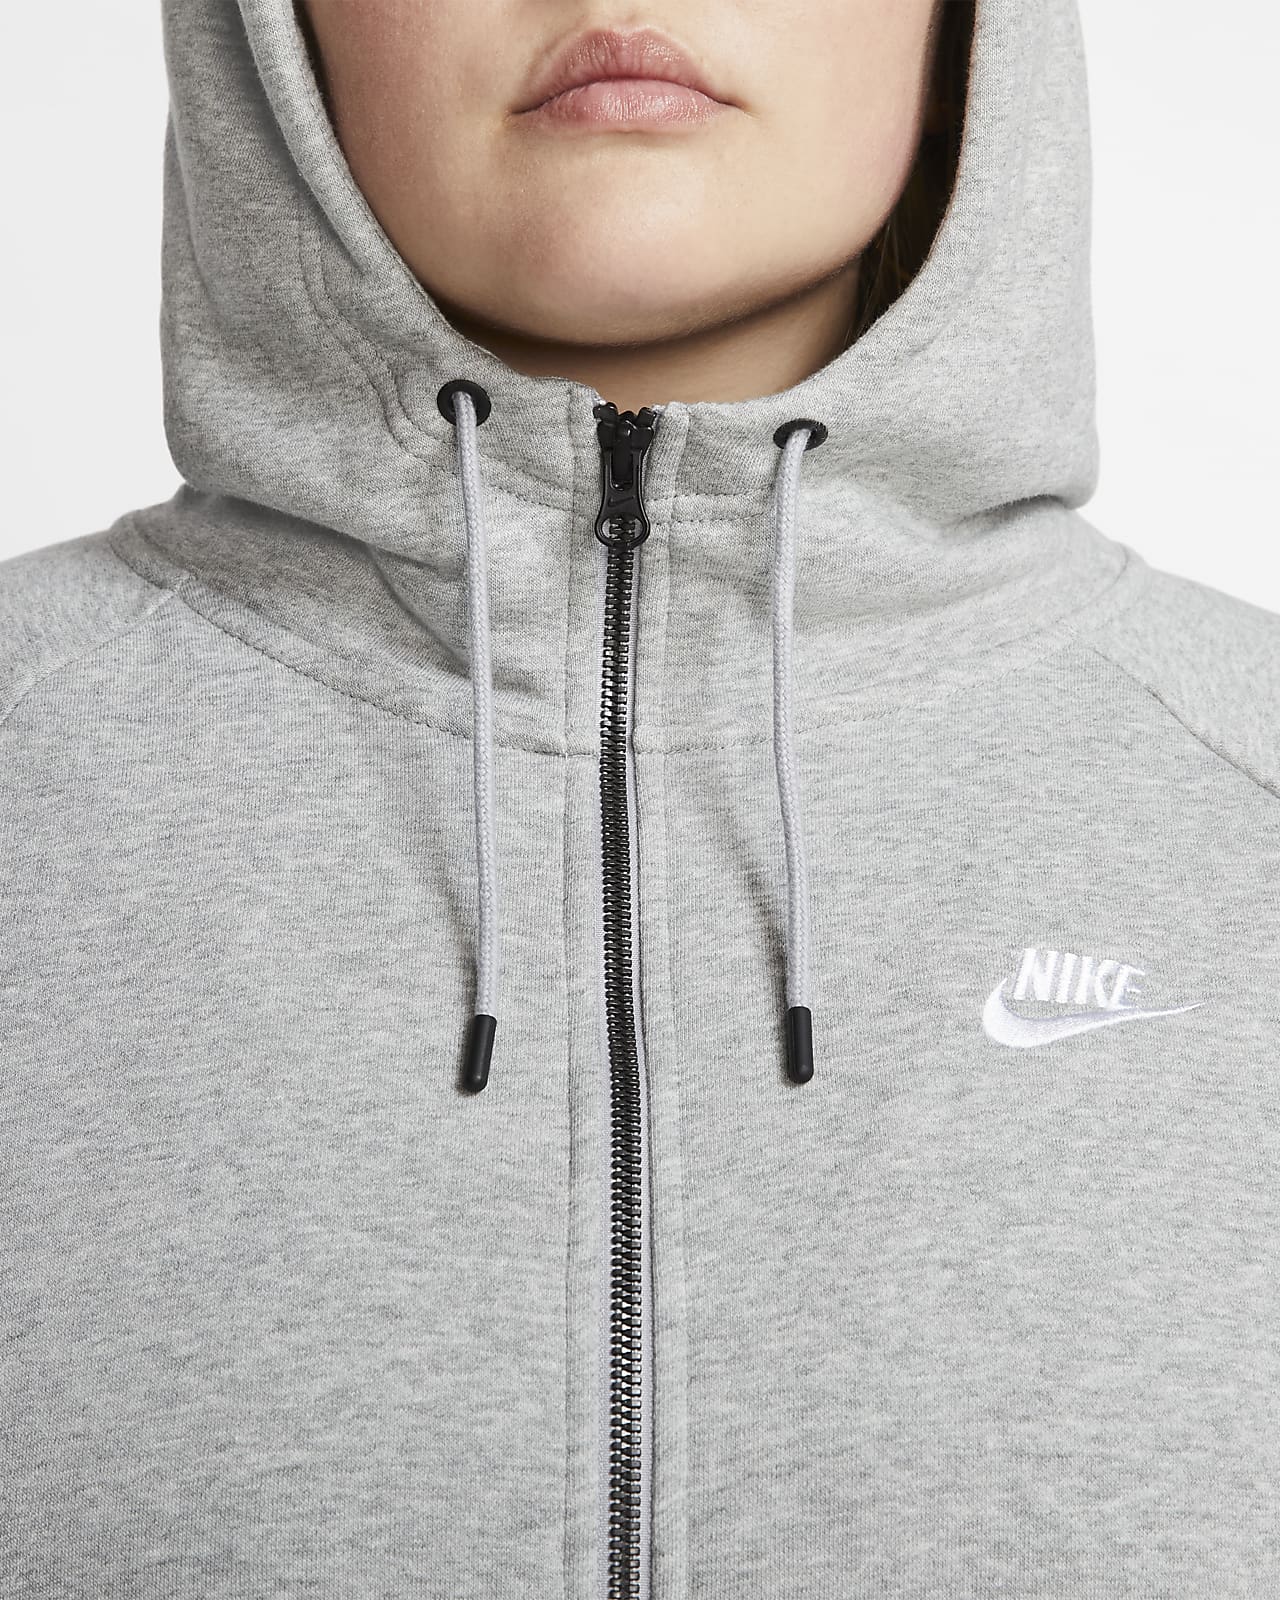 Uplifted I wear clothes detergent Nike Sportswear Essential (Plus size) Women's Full-Zip Hoodie. Nike SA